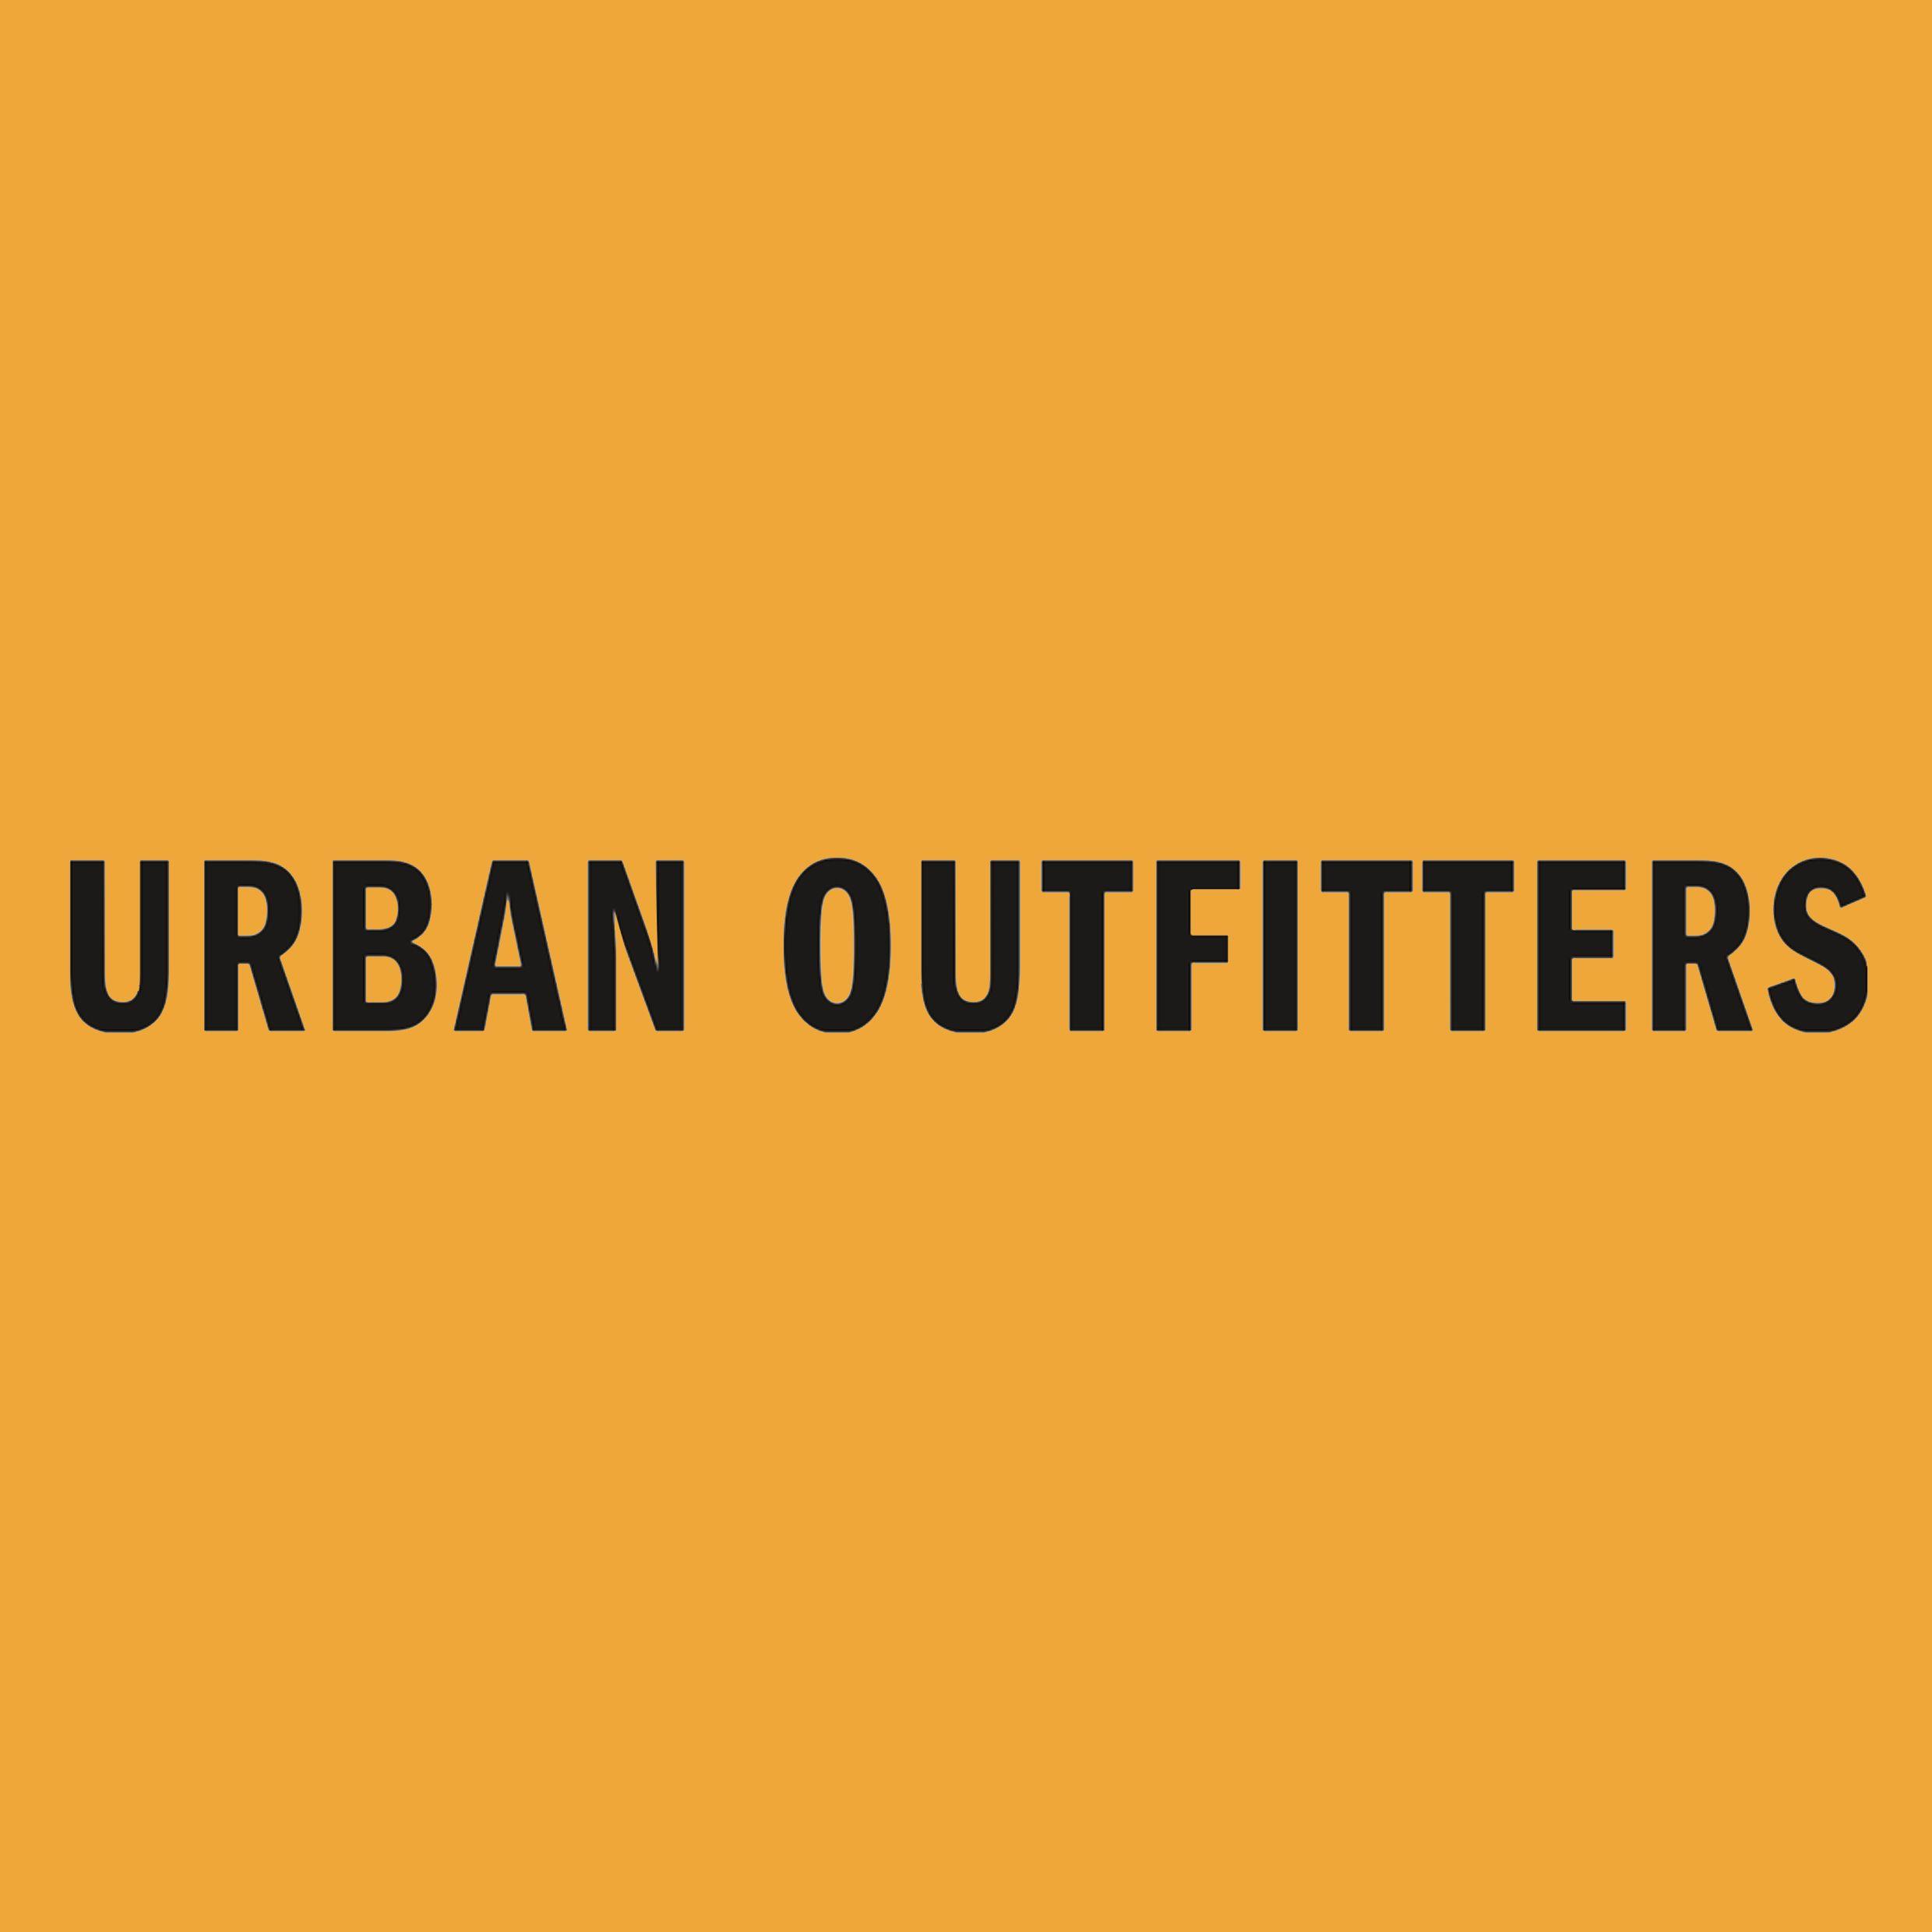 Urban Outfitters Logo - URBAN OUTFITTERS